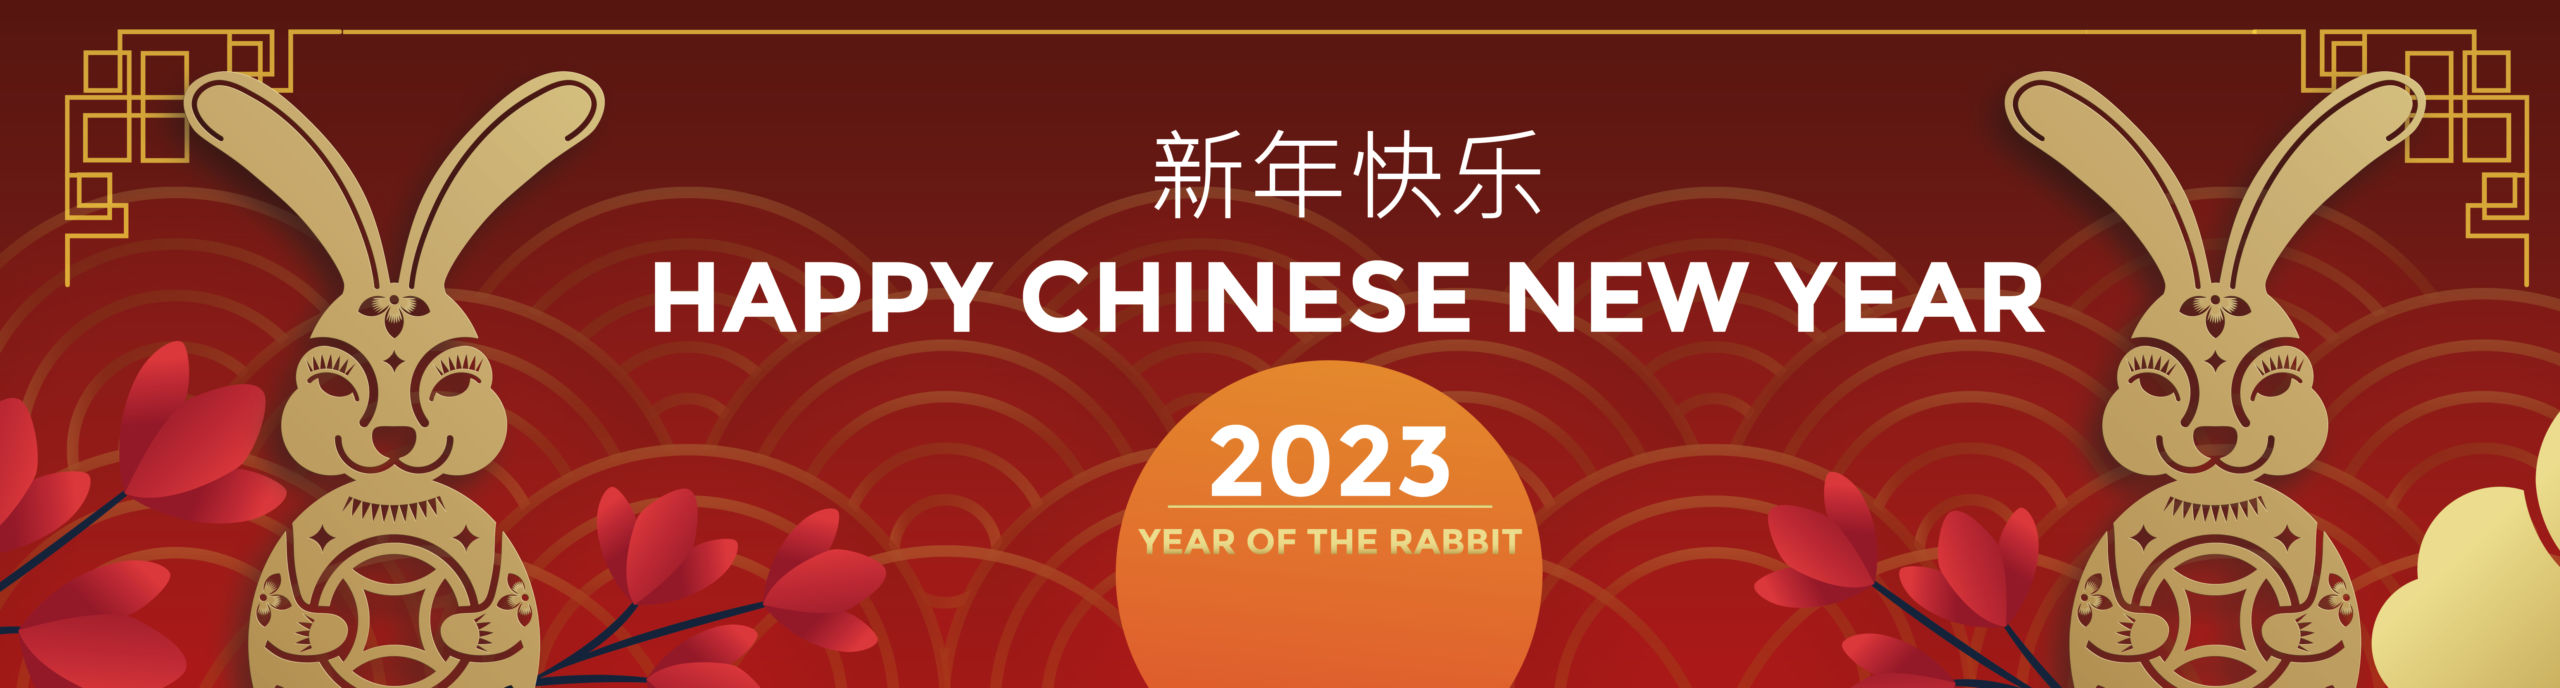 weMED Clinics, Chinese New Year, Home, Houston TX, Year of the Rabbit